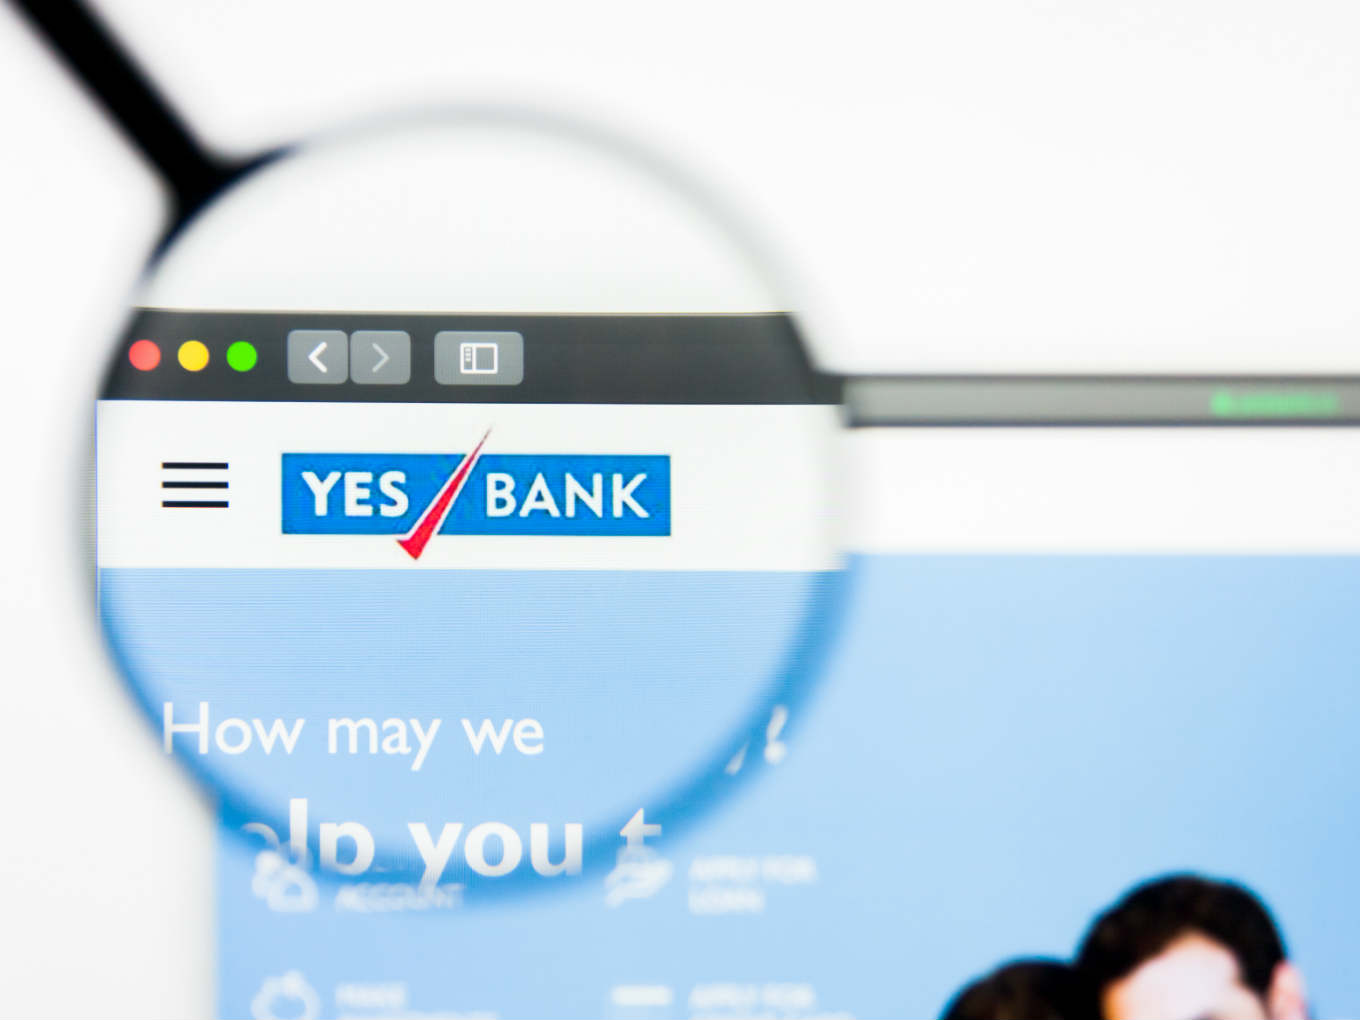 YES Bank Moratorium Impact On Fintech: UPI, APIs, Point Of Sales And More